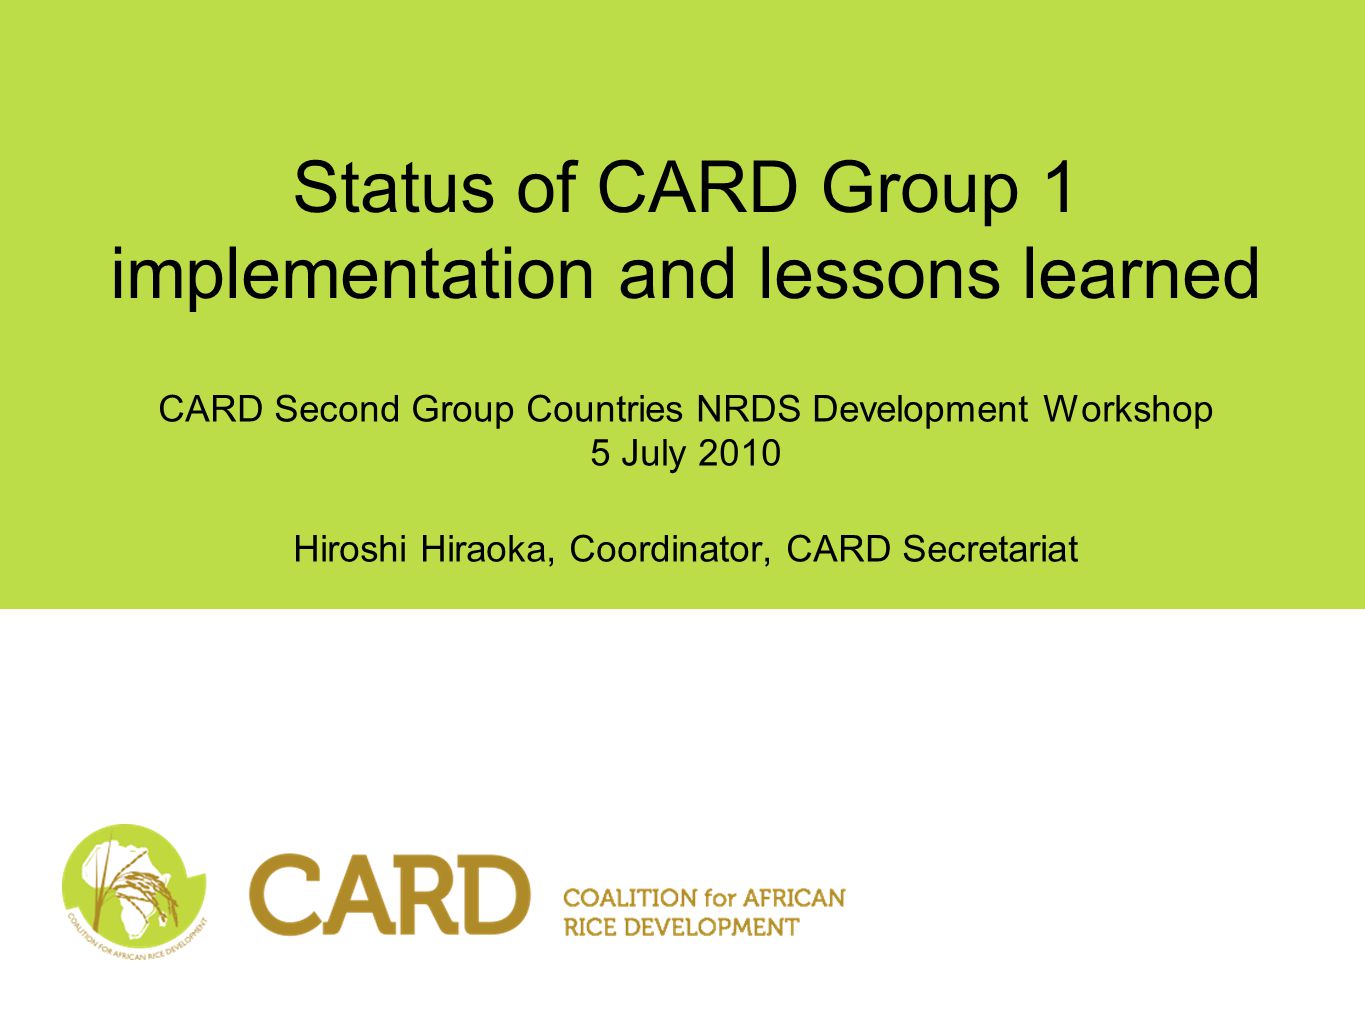 Status of CARD Group 1 implementation and lessons learned CARD Second Group Countries NRDS Development Workshop 5 July 2010 Hiroshi Hiraoka, Coordinator, CARD Secretariat